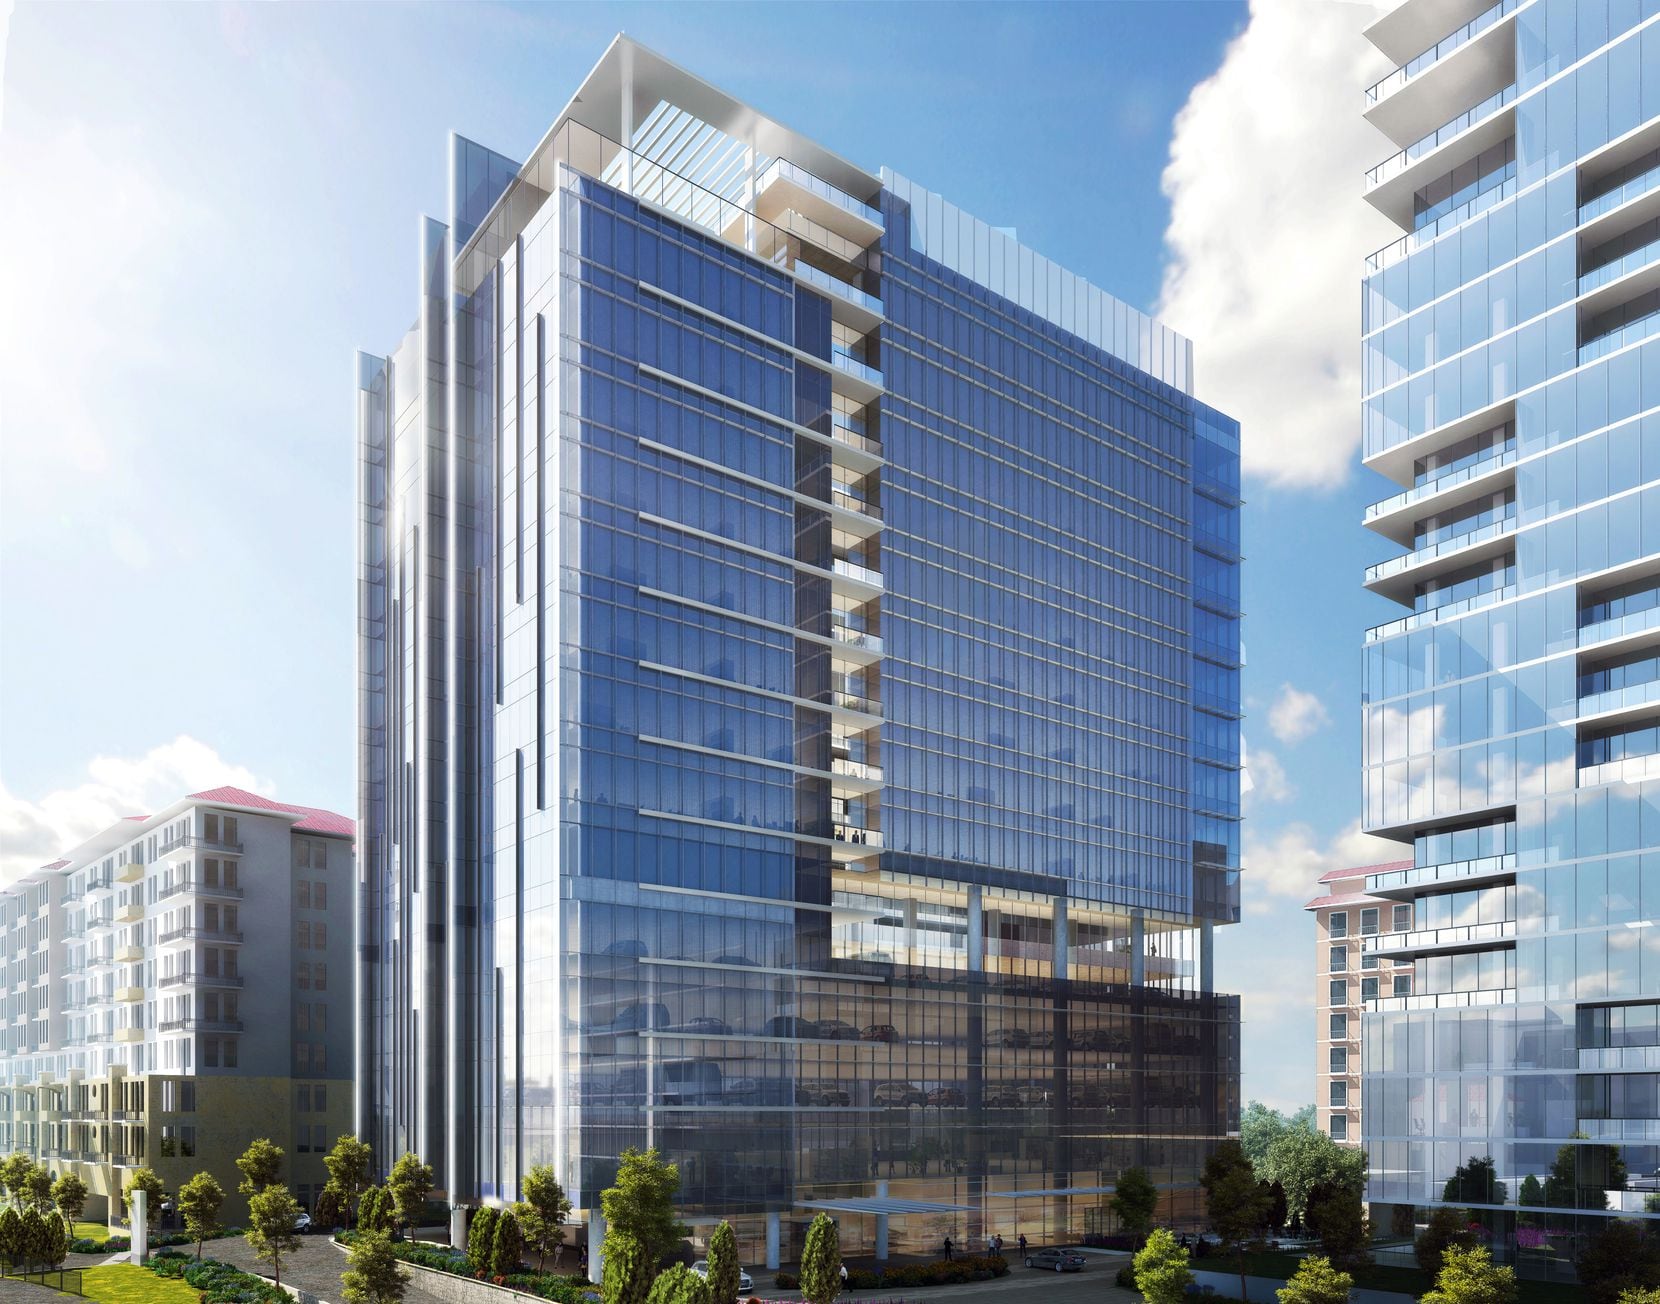 The 3-building project will include a 19-story office tower.